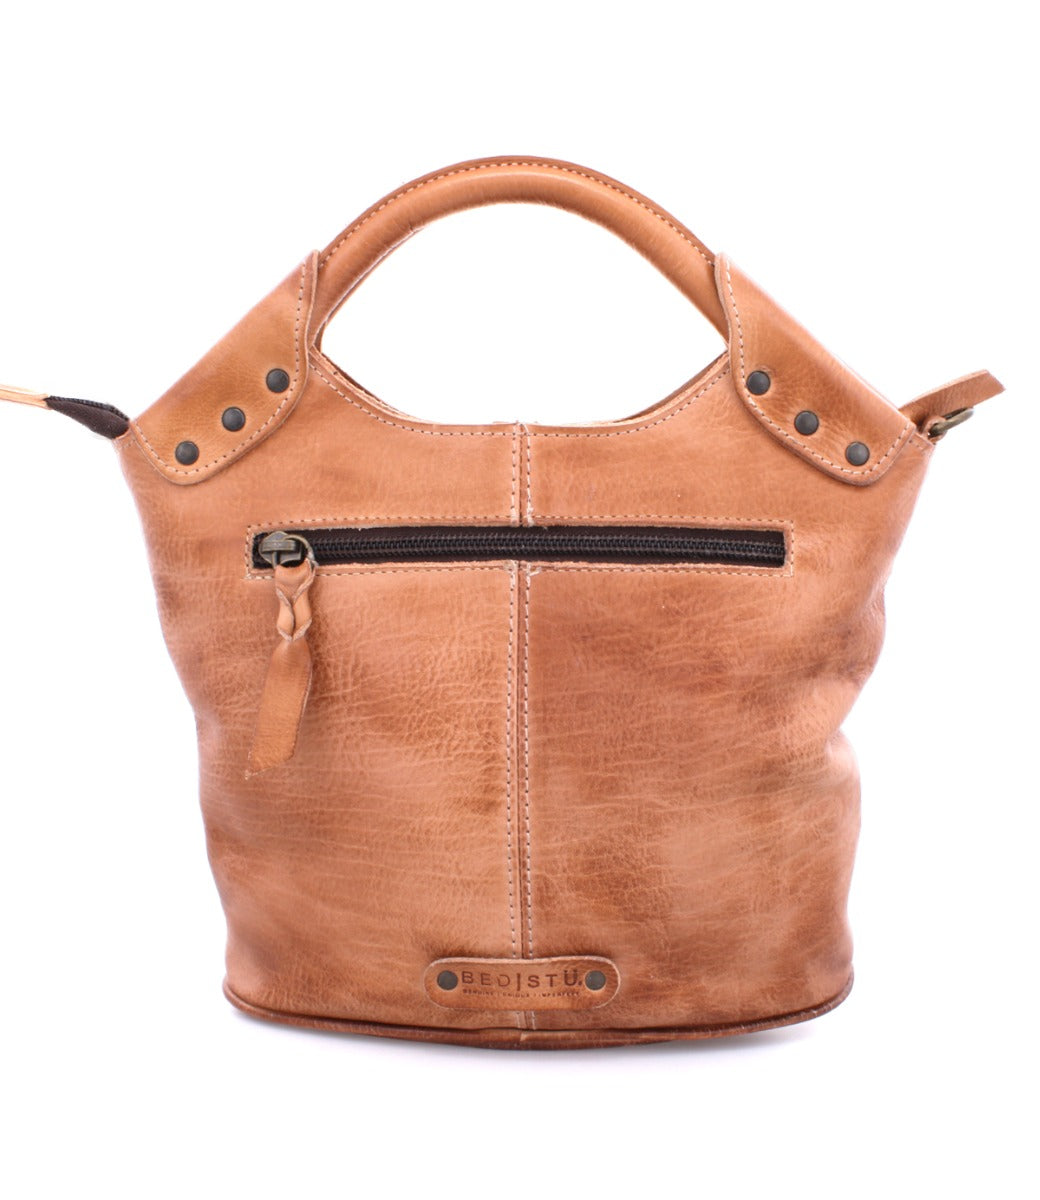 A Delilah leather handbag from Bed Stu with a zipper.